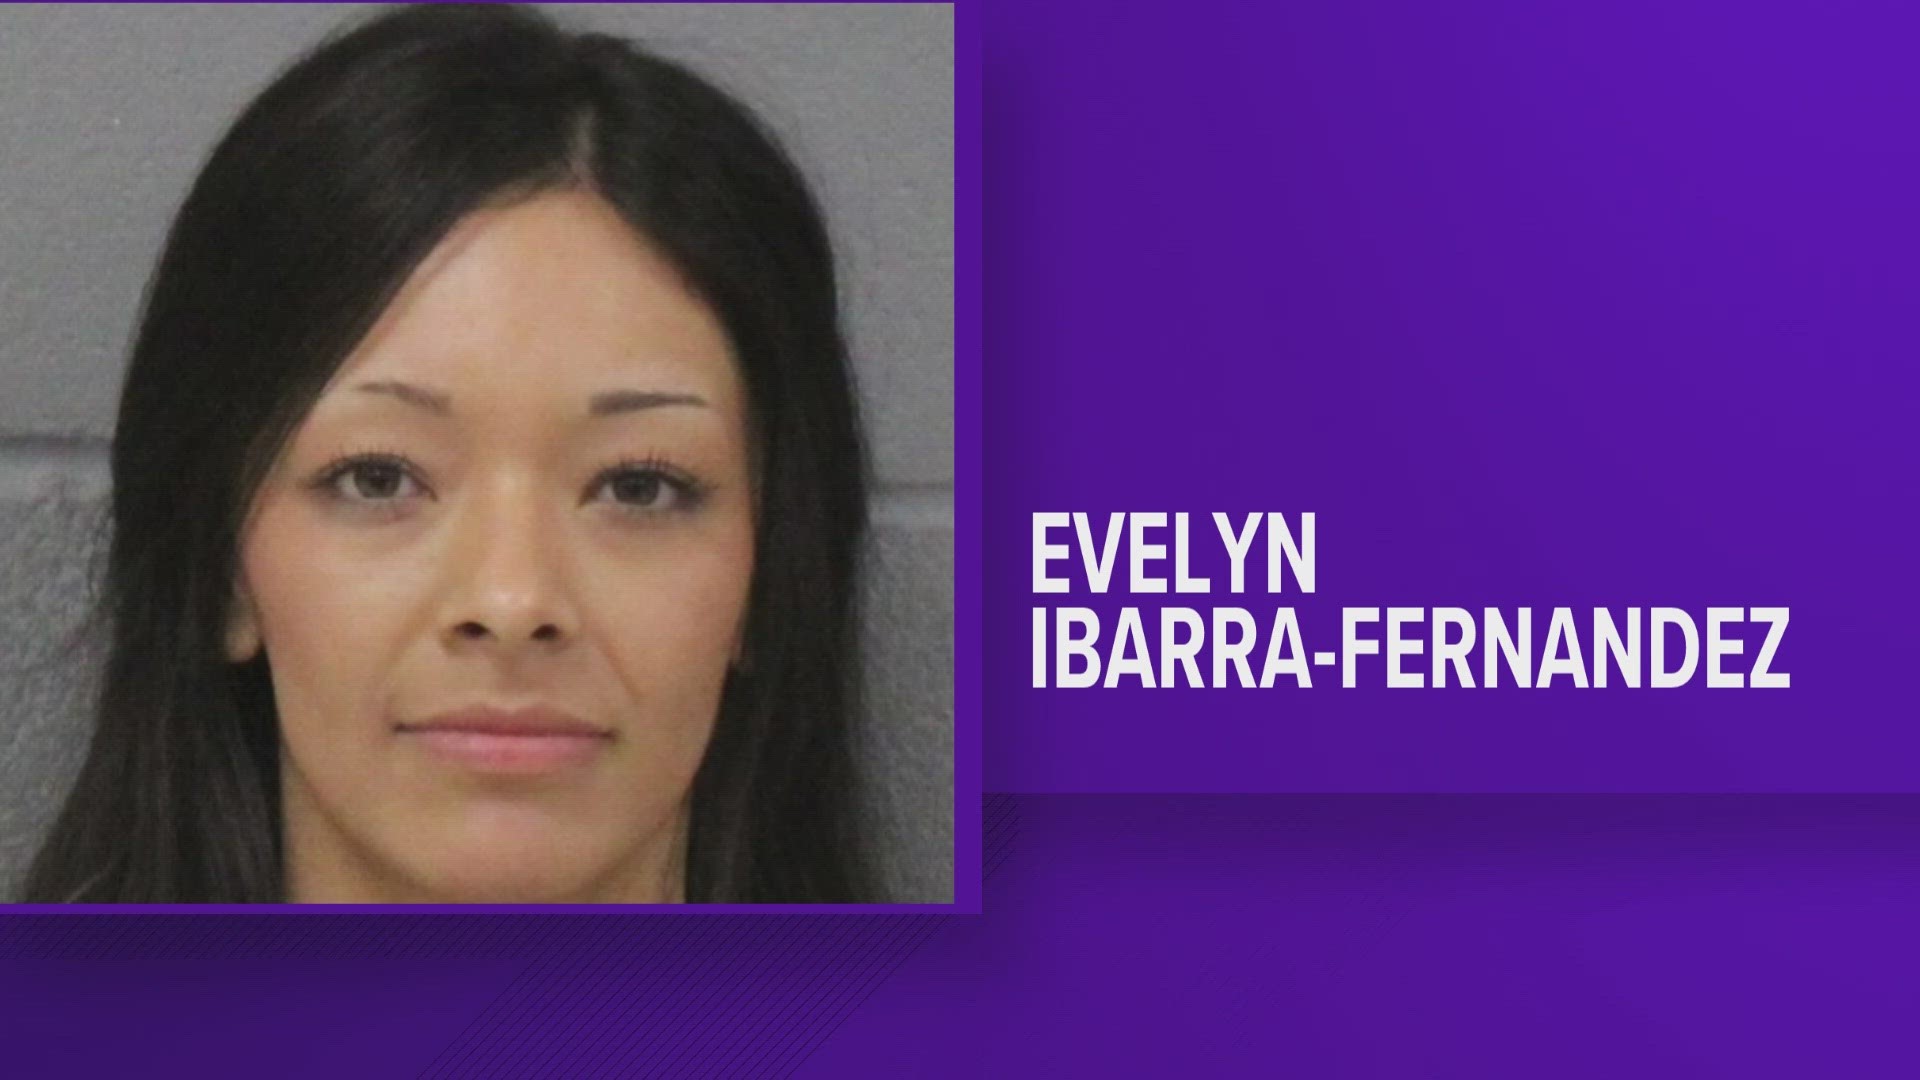 Evelyn Ibarra-Fernandez, 23, allegedly claimed to be an officer while stealing more than $800 in cash and various items from the victims.